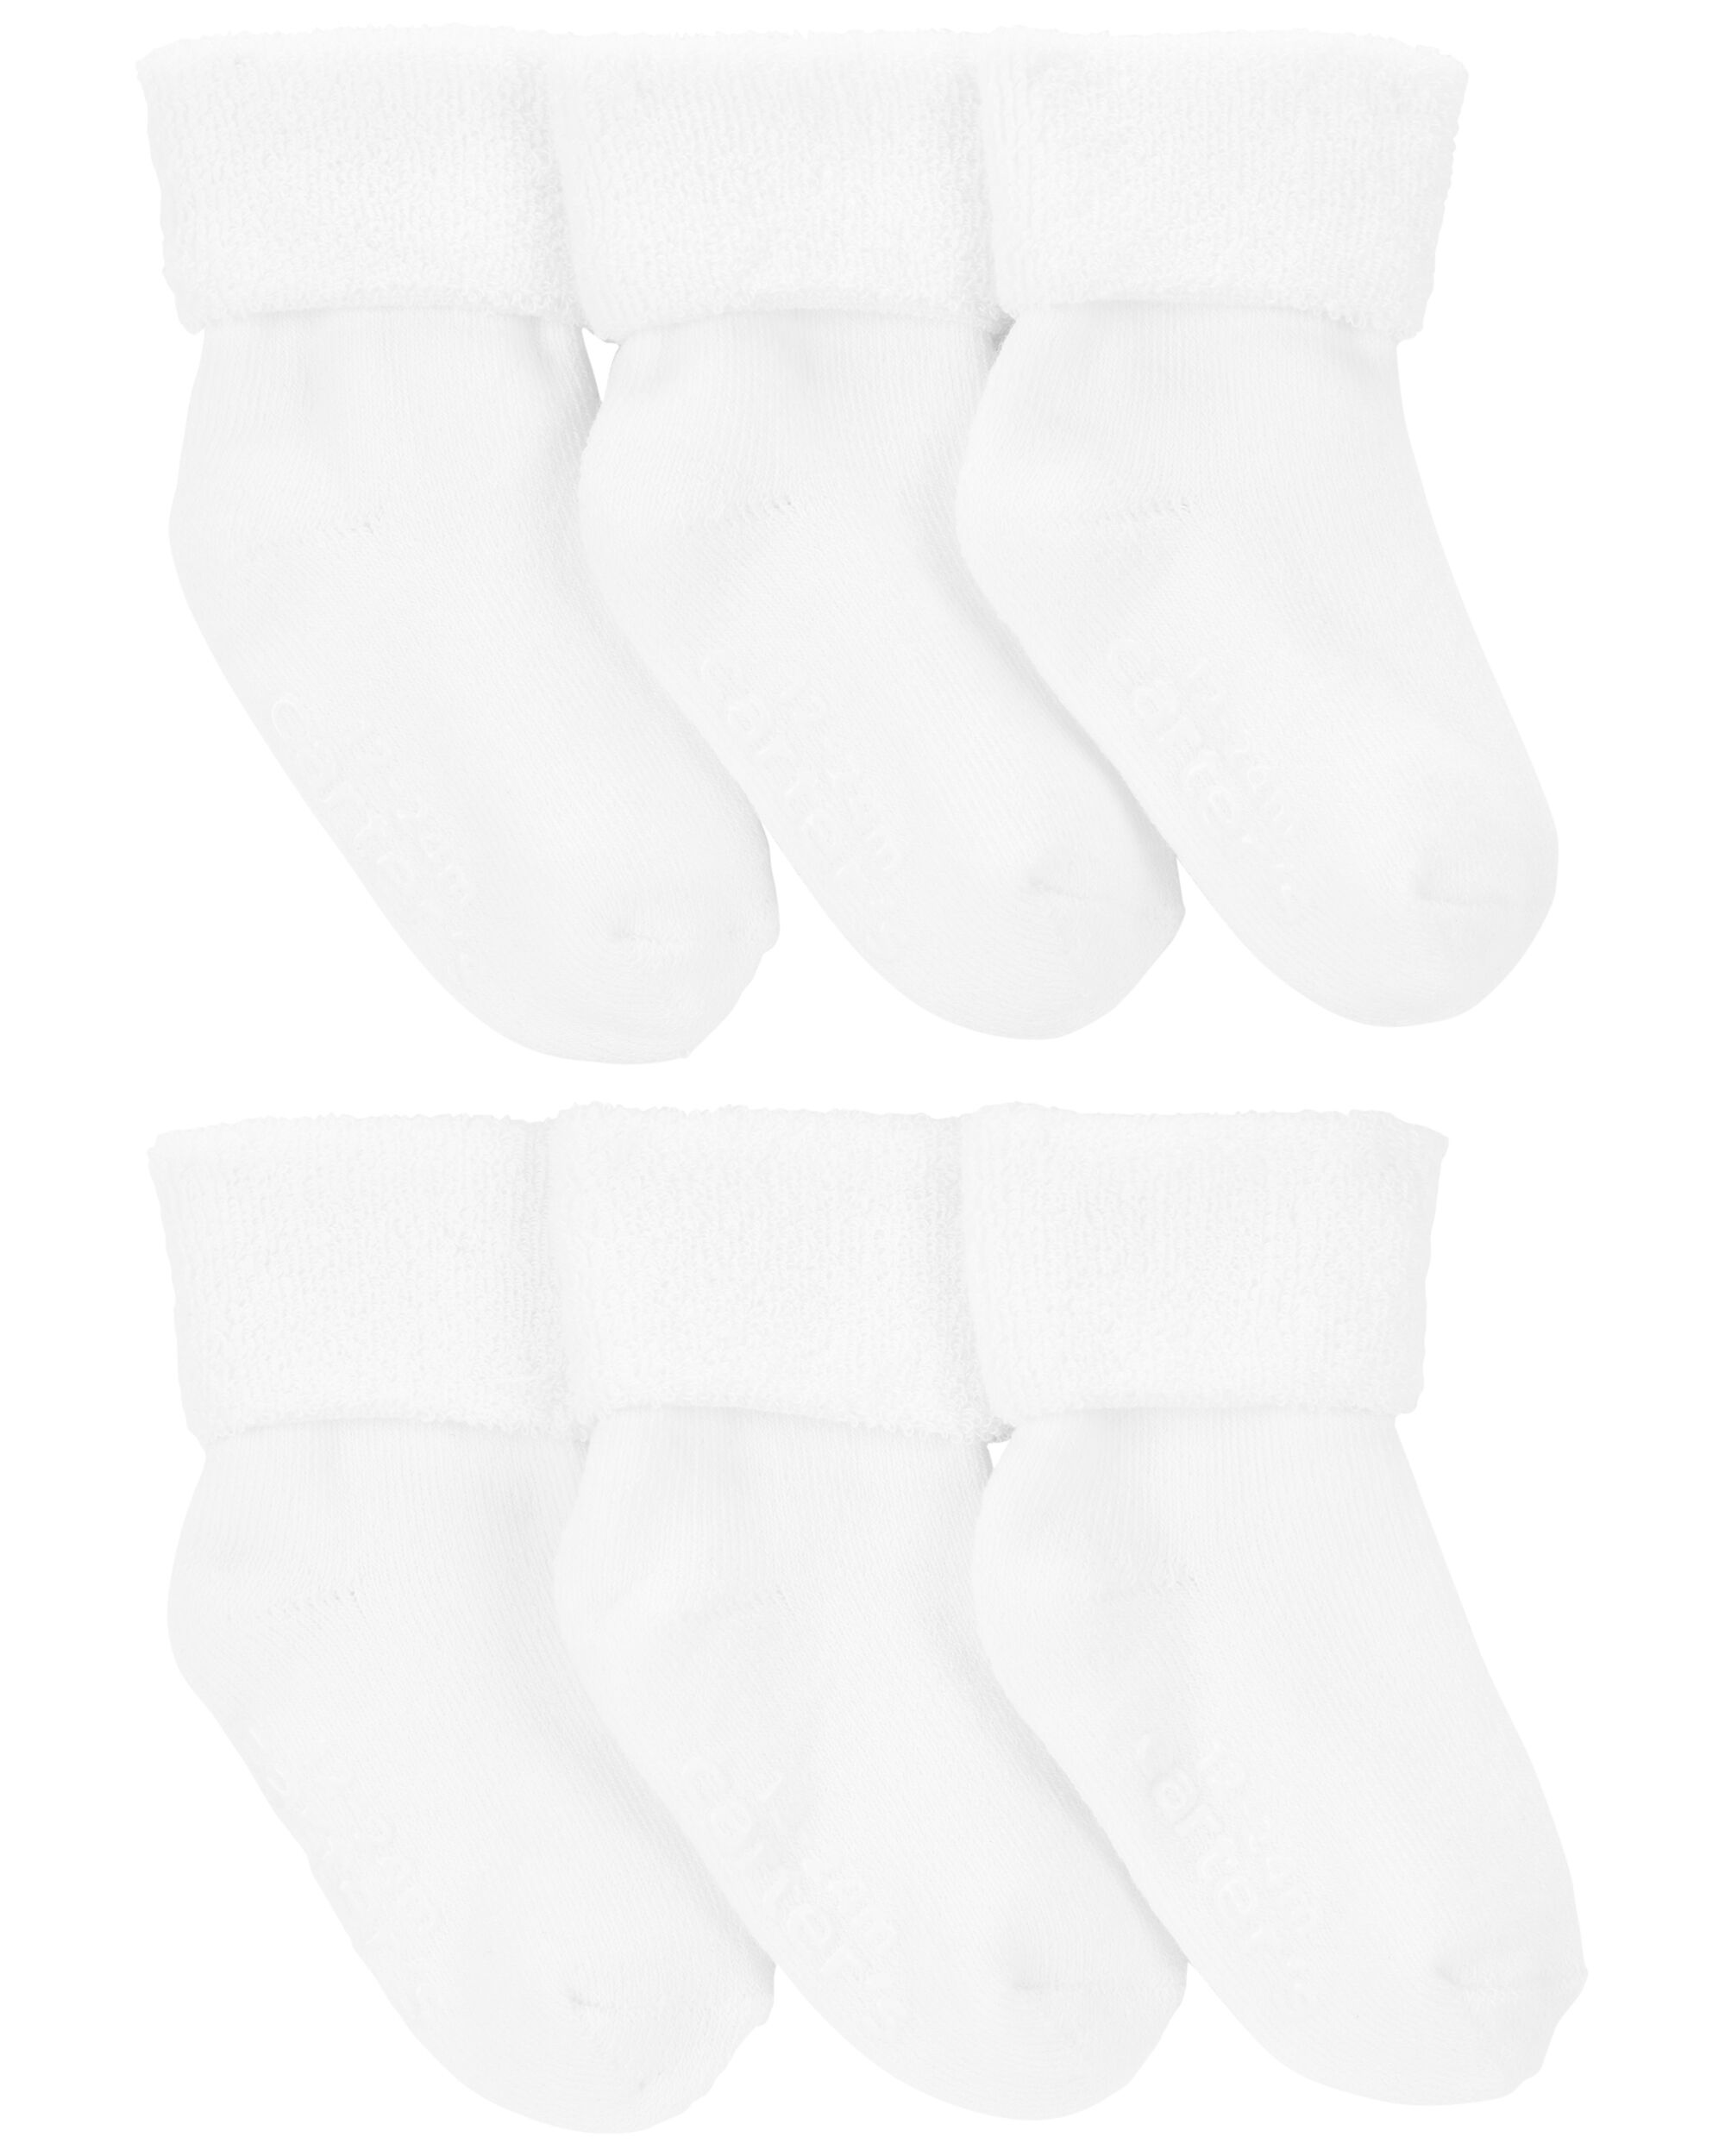 Carters Baby 6-Pack Foldover Booties